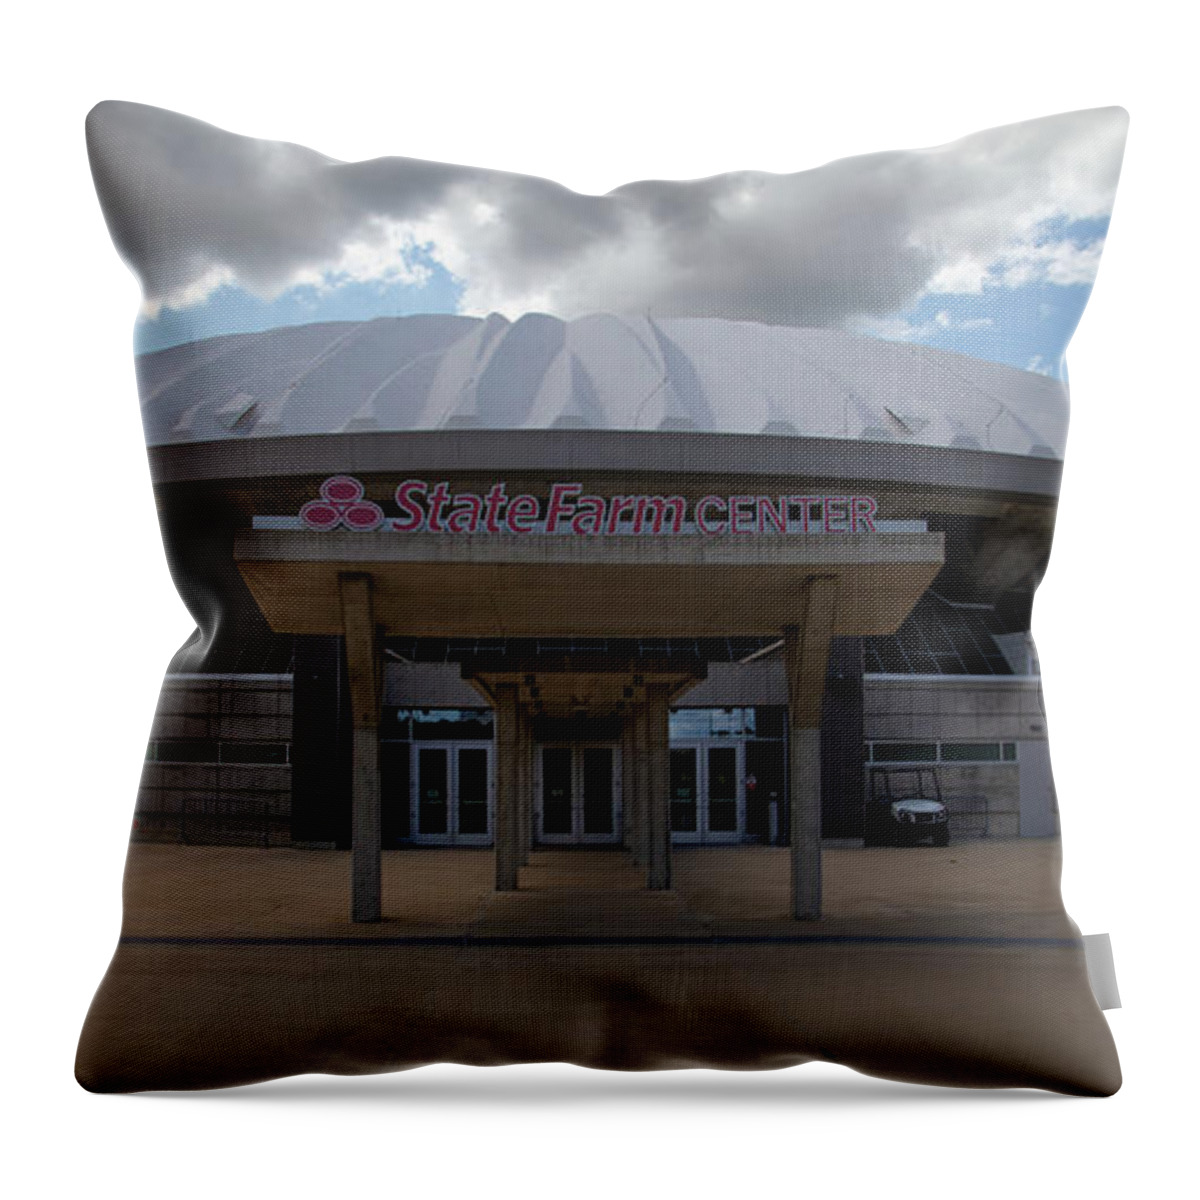 University Of Illinois Throw Pillow featuring the photograph Wide shot of State Farm Center at University of Illinois by Eldon McGraw